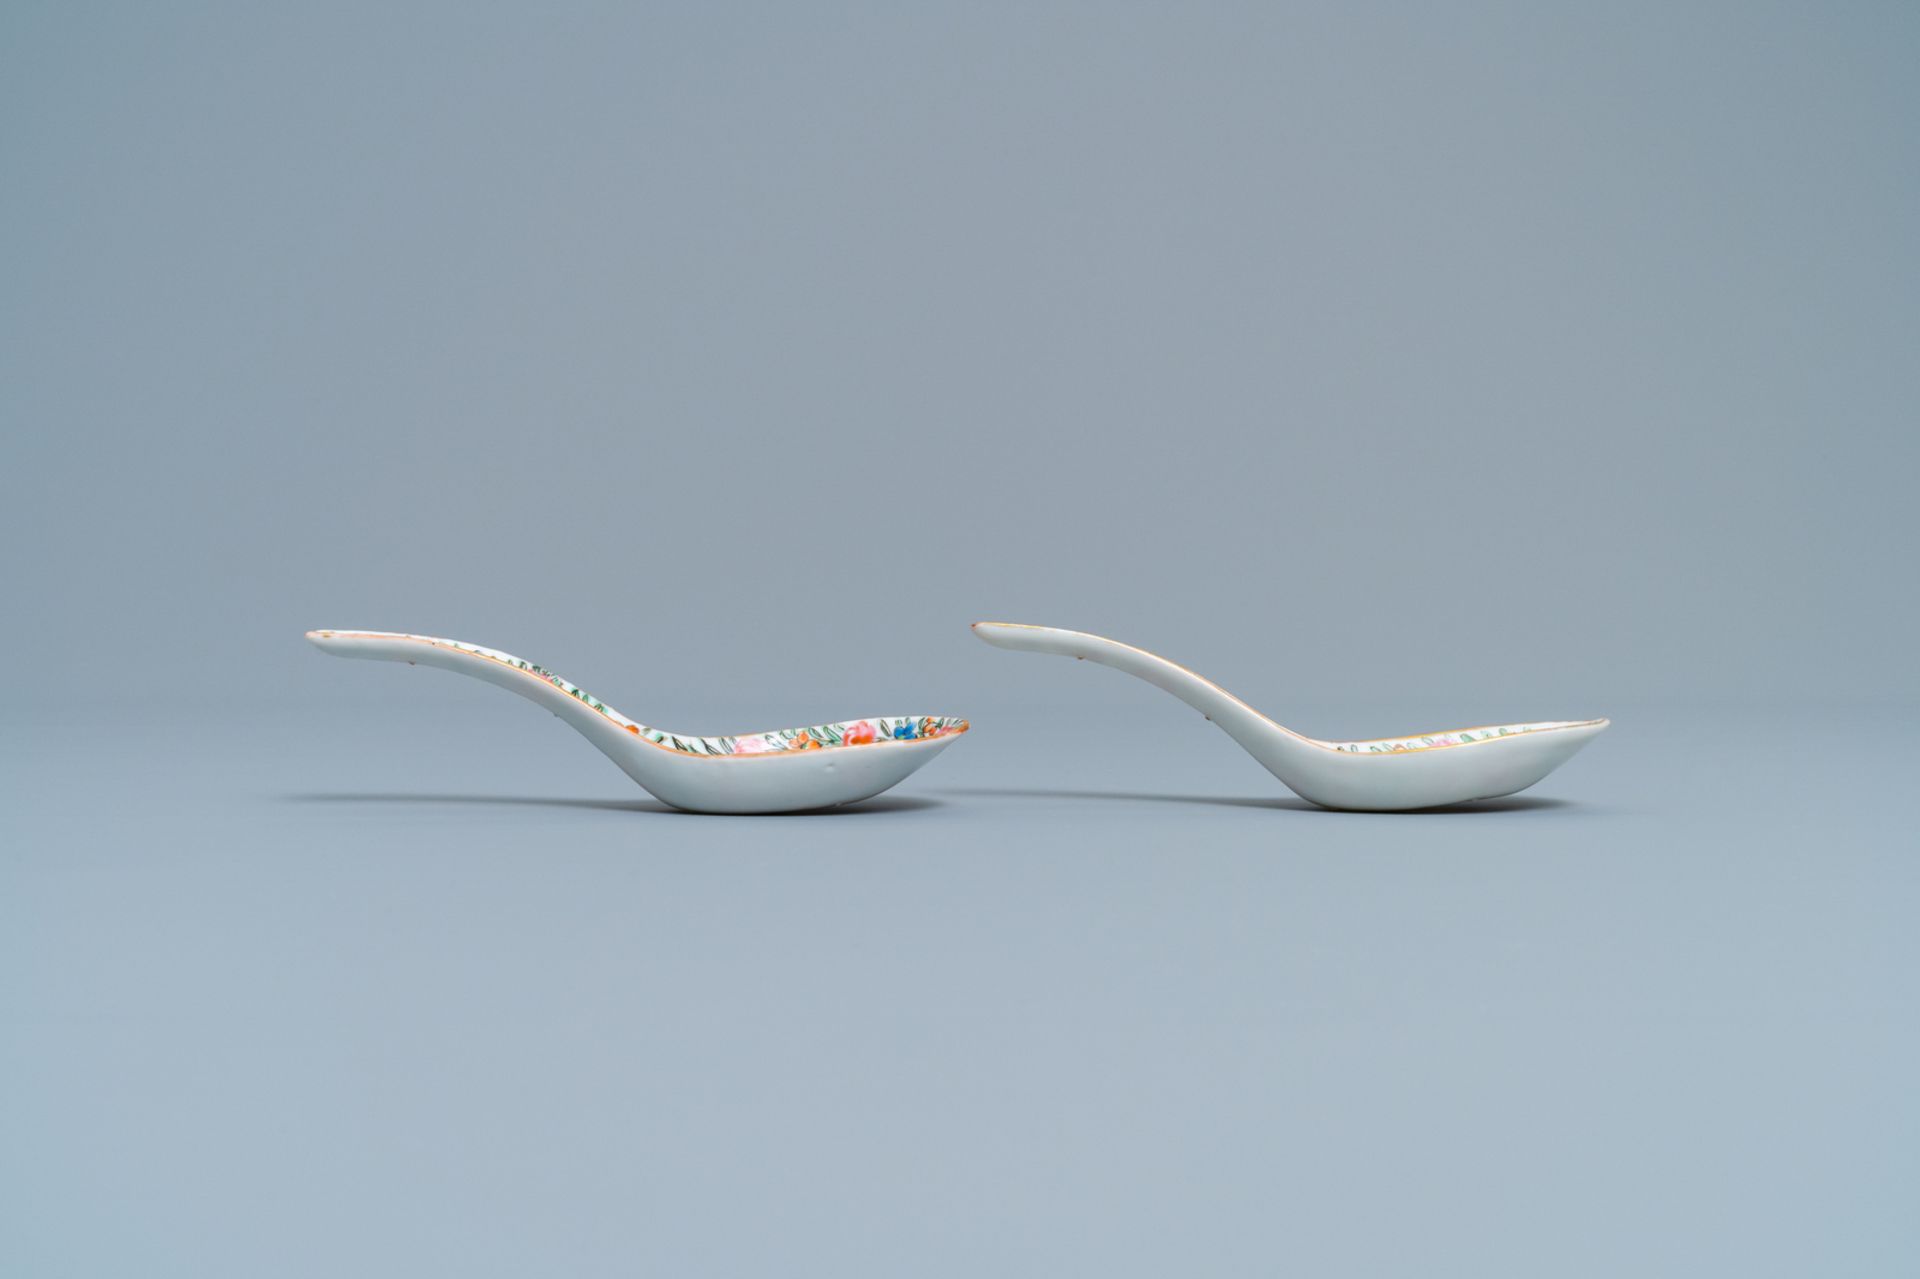 A pair of Chinese Thai market Bencharong spoons, 19th C. - Image 6 of 6